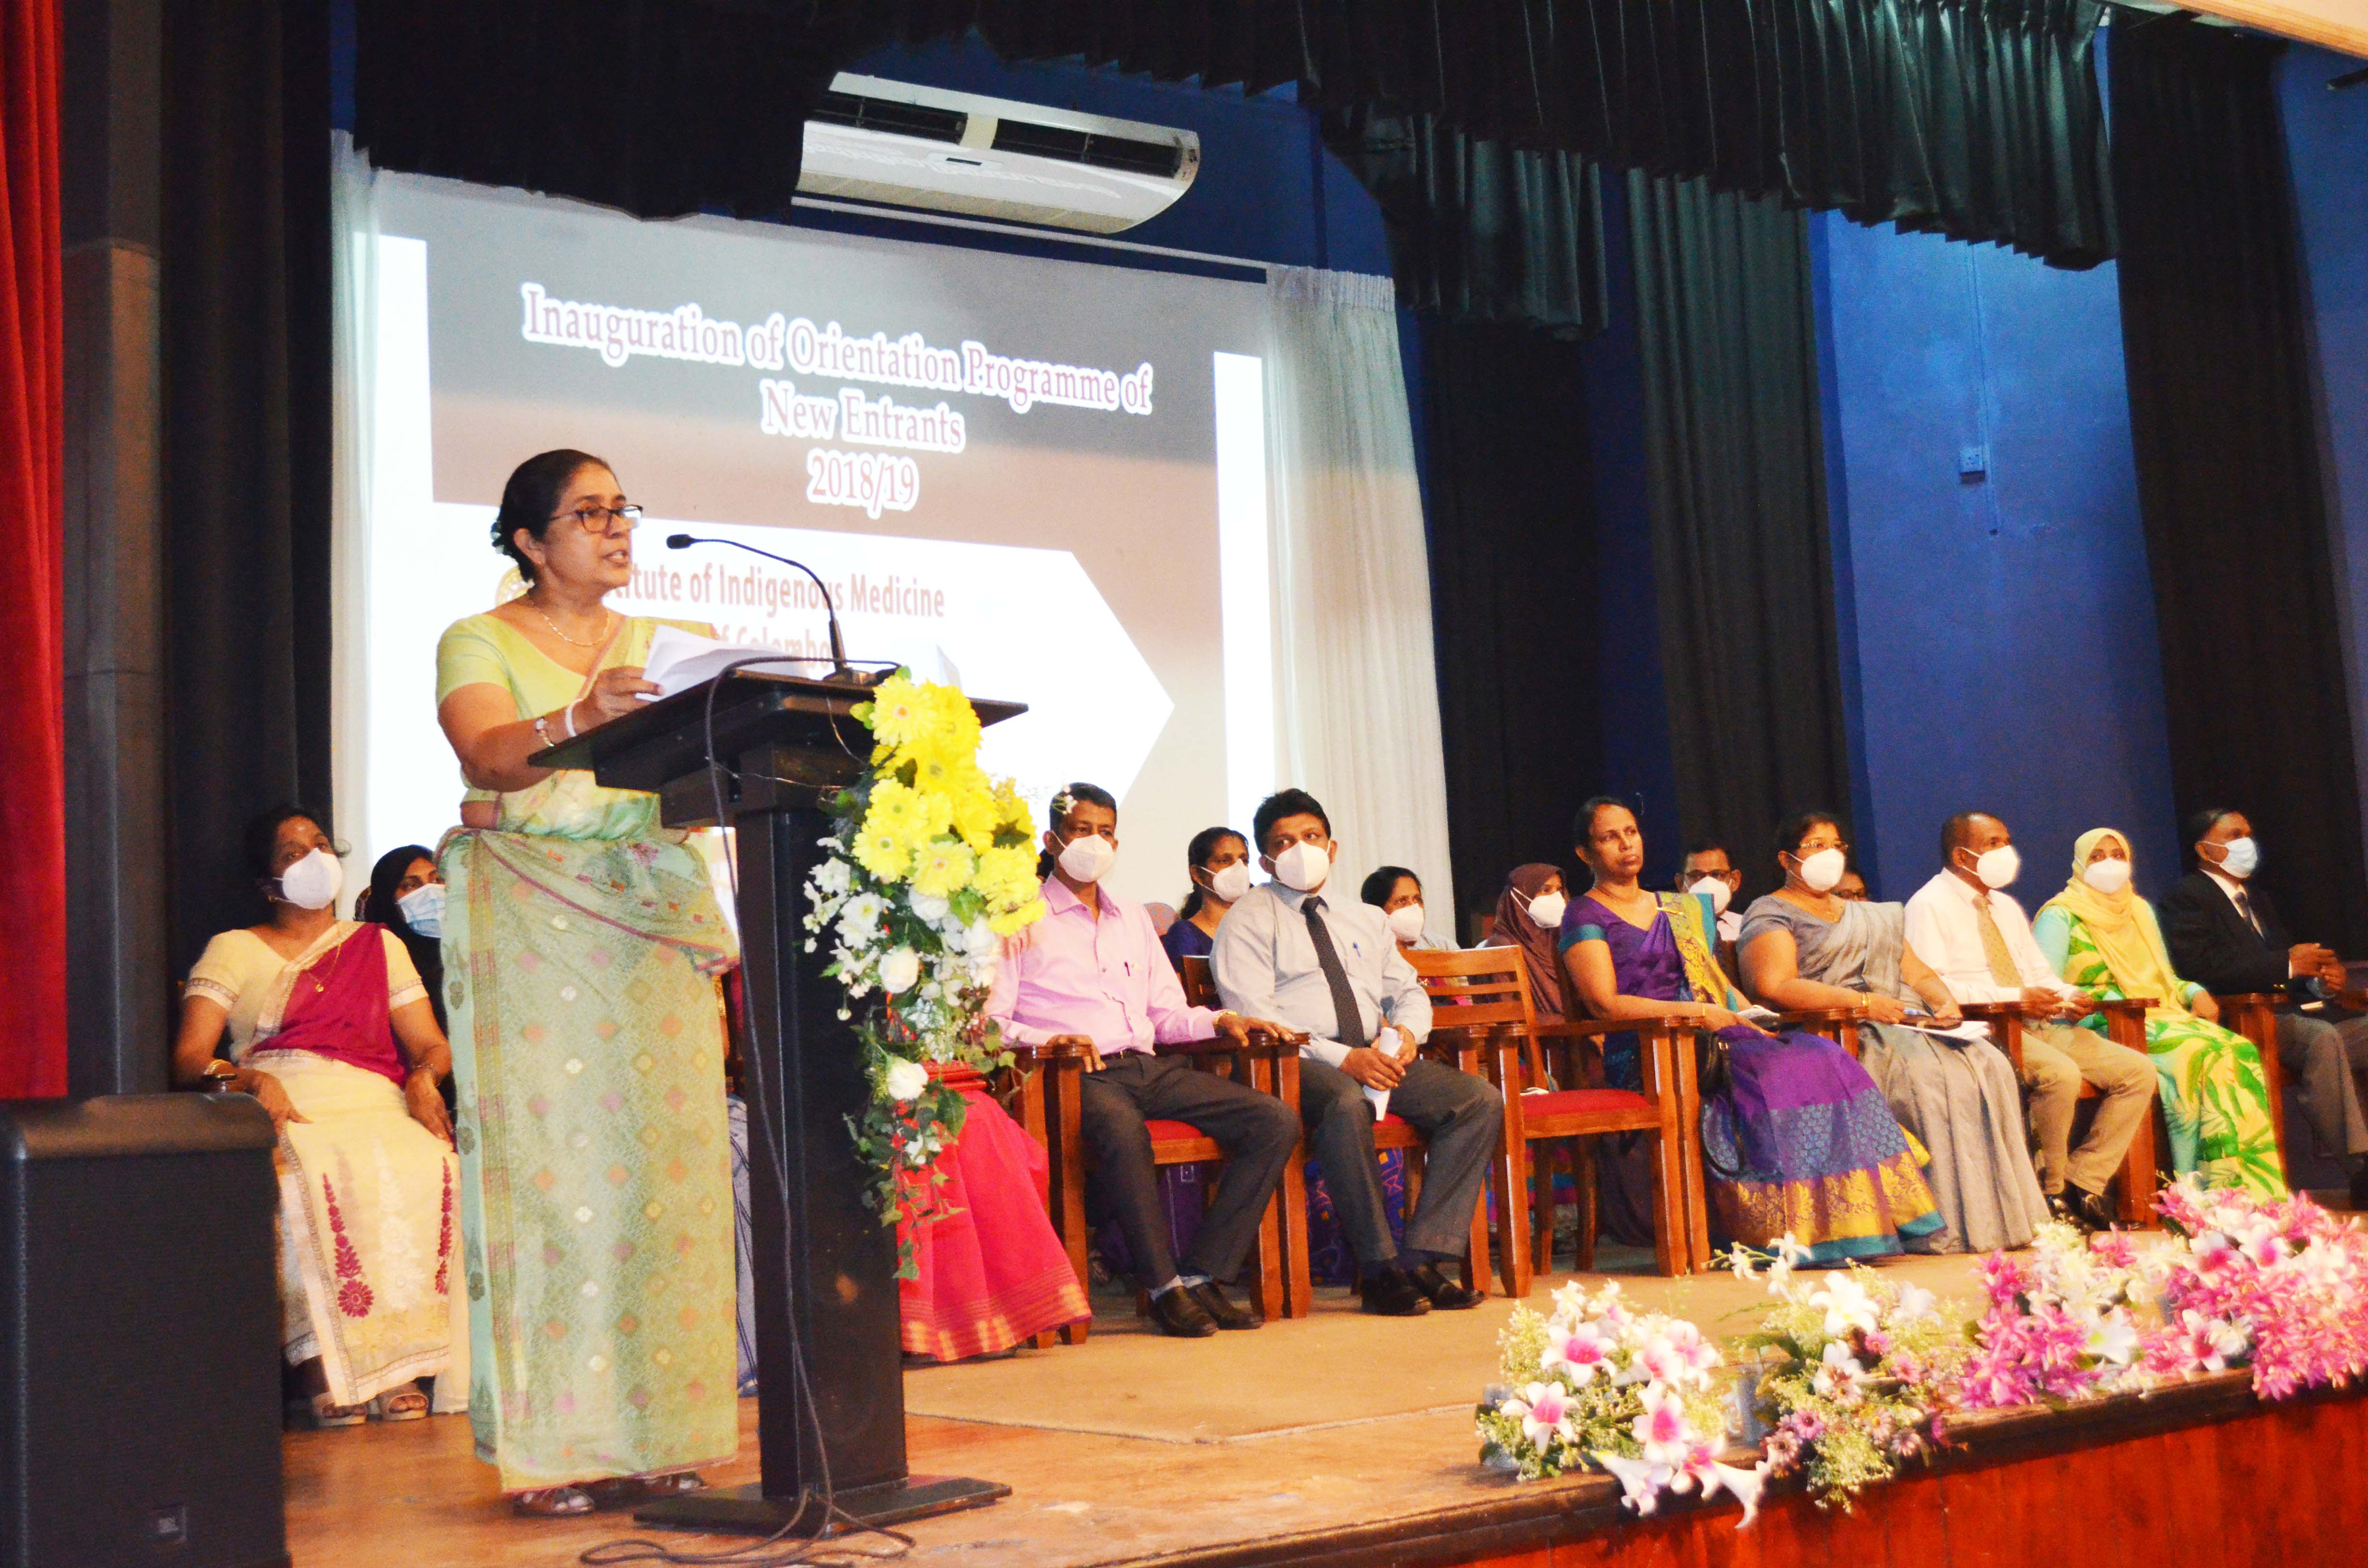 Inauguration of Orientation Programme of New Entrants(2018/19)  : Institute of Indigenous Medicine, University of Colombo